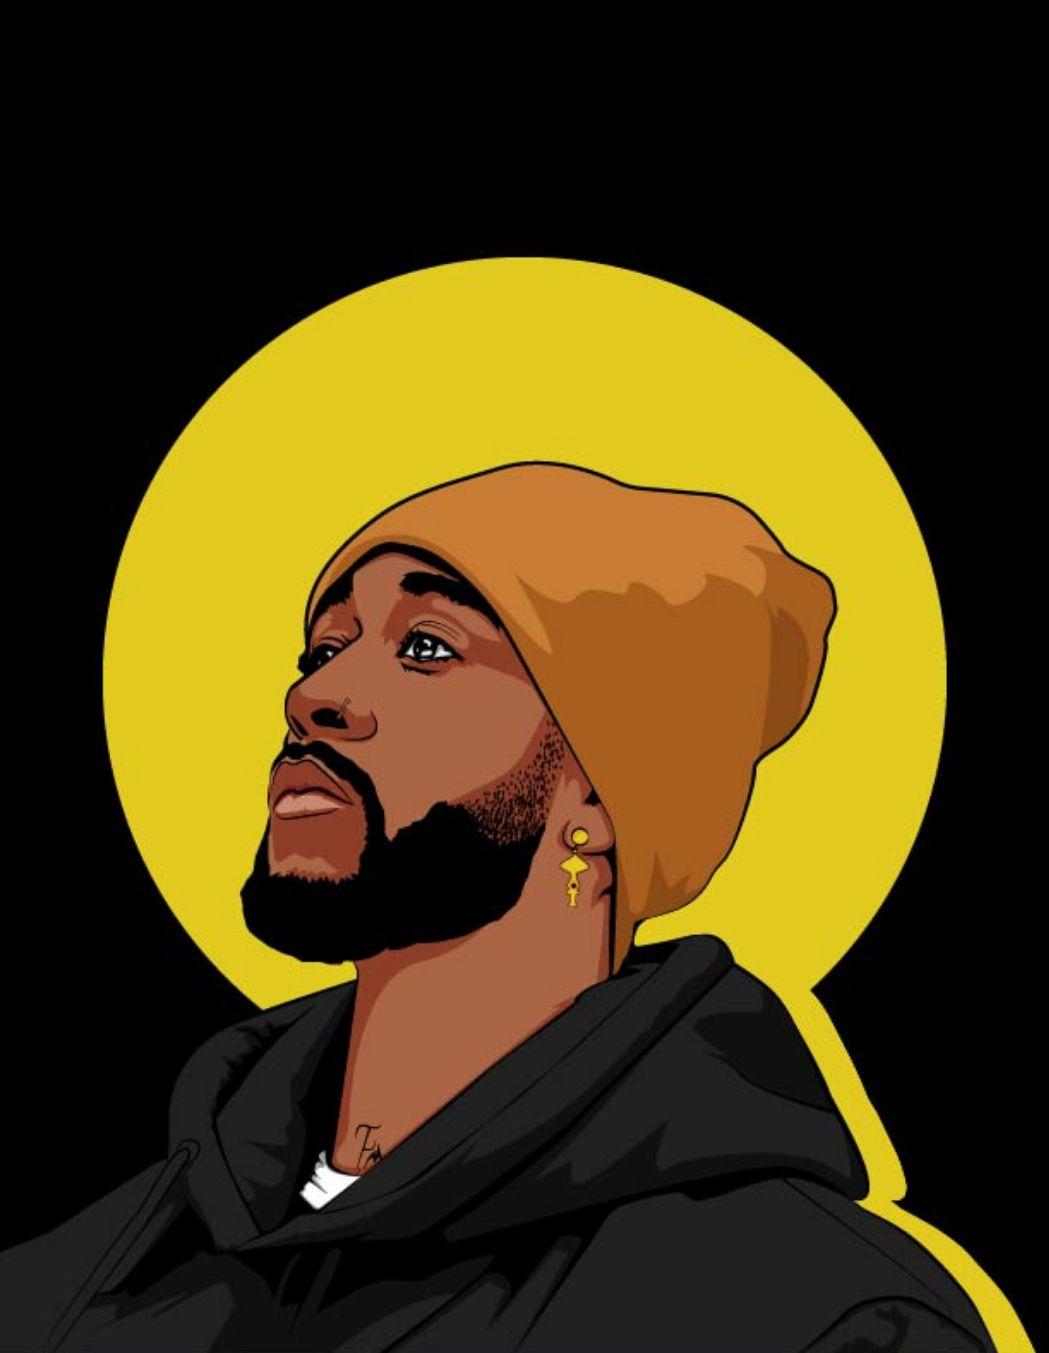 omarion art. vector potrait by Cyler. Graphic design